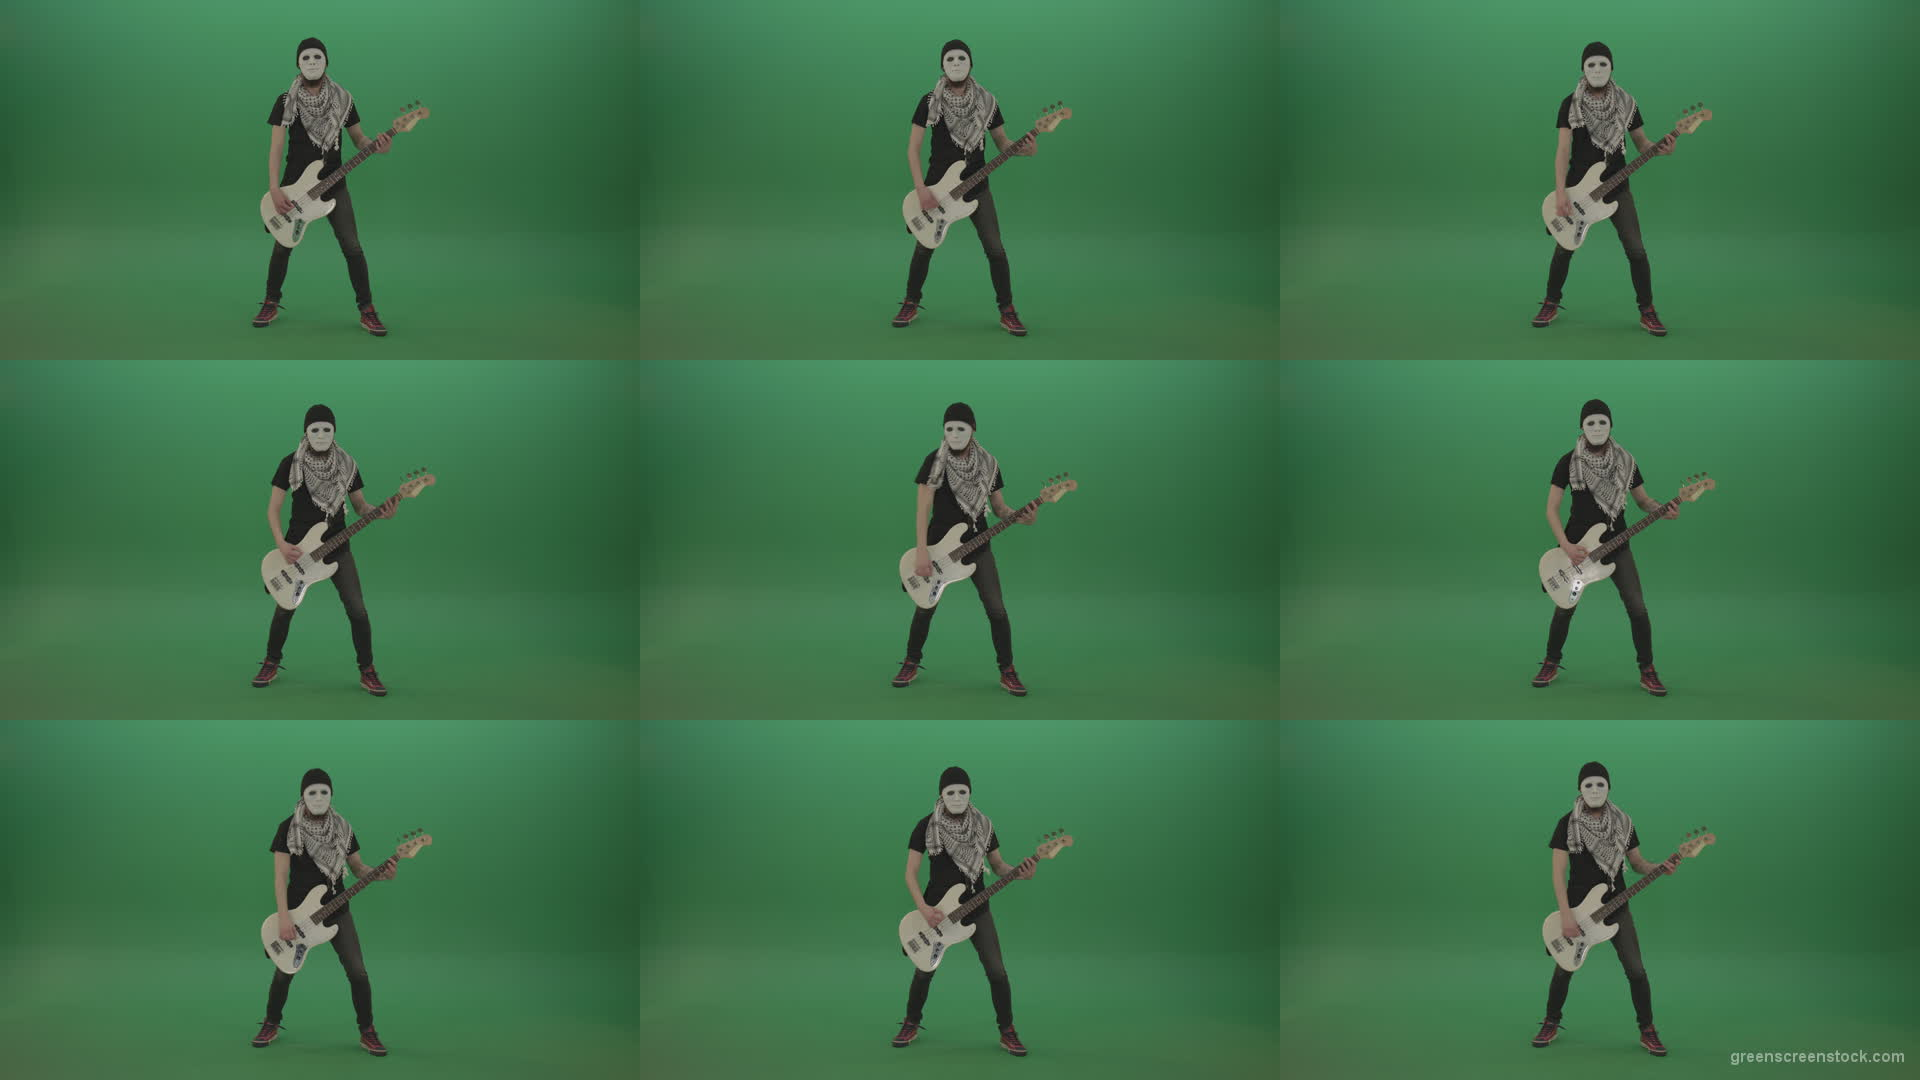 Bass-guitaris-in-full-size-play-white-guitar-in-white-mask-on-chromakey-green-screen Green Screen Stock